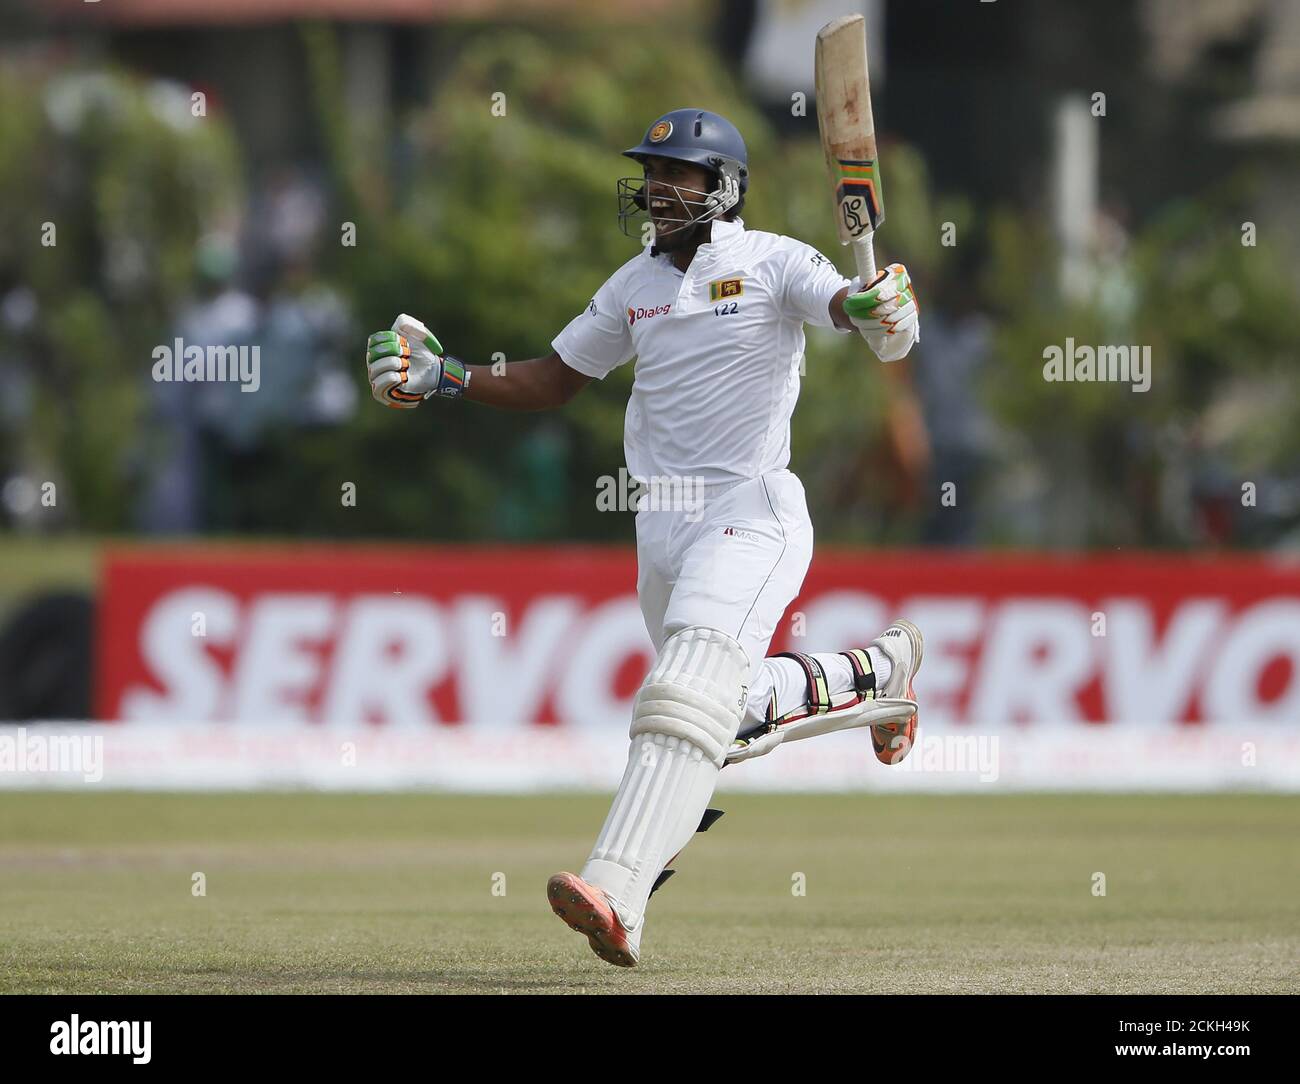 Sri Lanka's Dinesh Chandimal celebrates his century during the third day of their first test cricket match against India in Galle August 14, 2015. REUTERS/Dinuka Liyanawatte Stock Photo